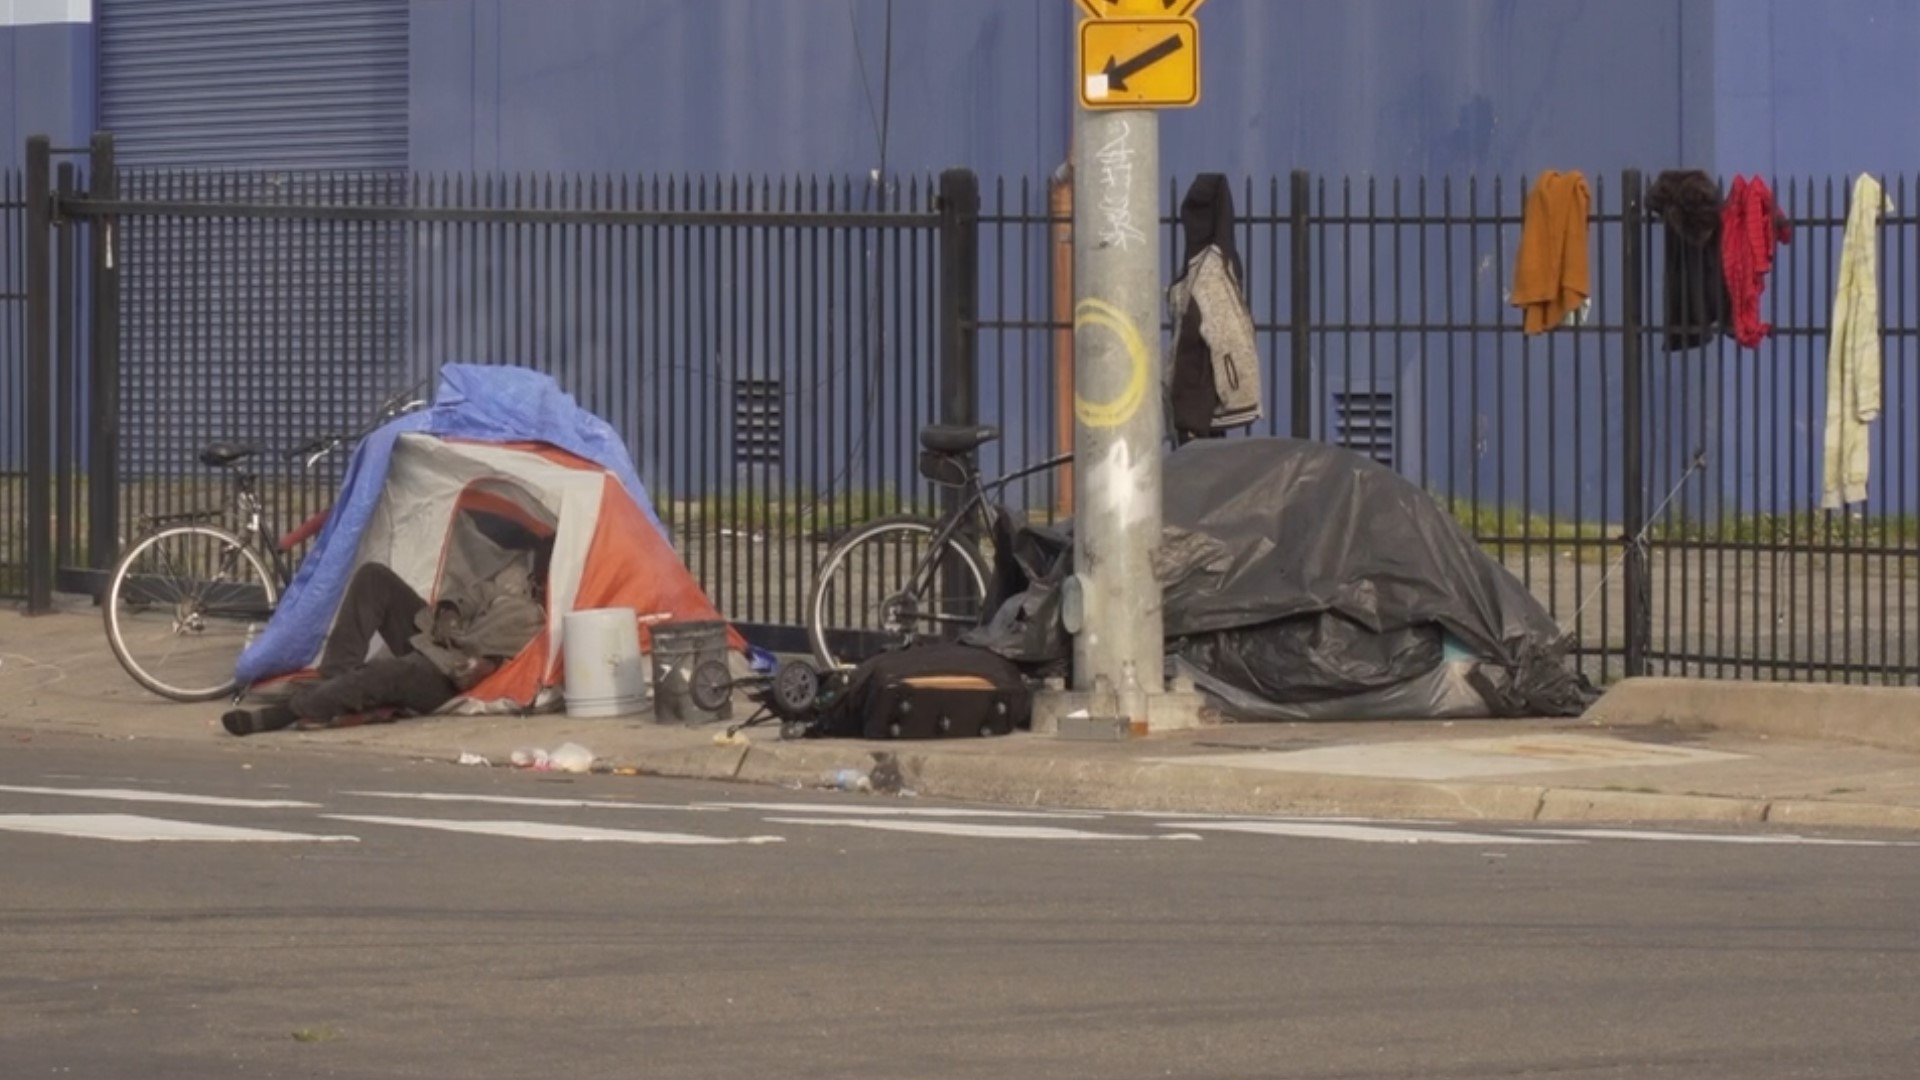 The recent deaths of three people experiencing homelessness are raising attention to the many safety concerns of people living on the street.